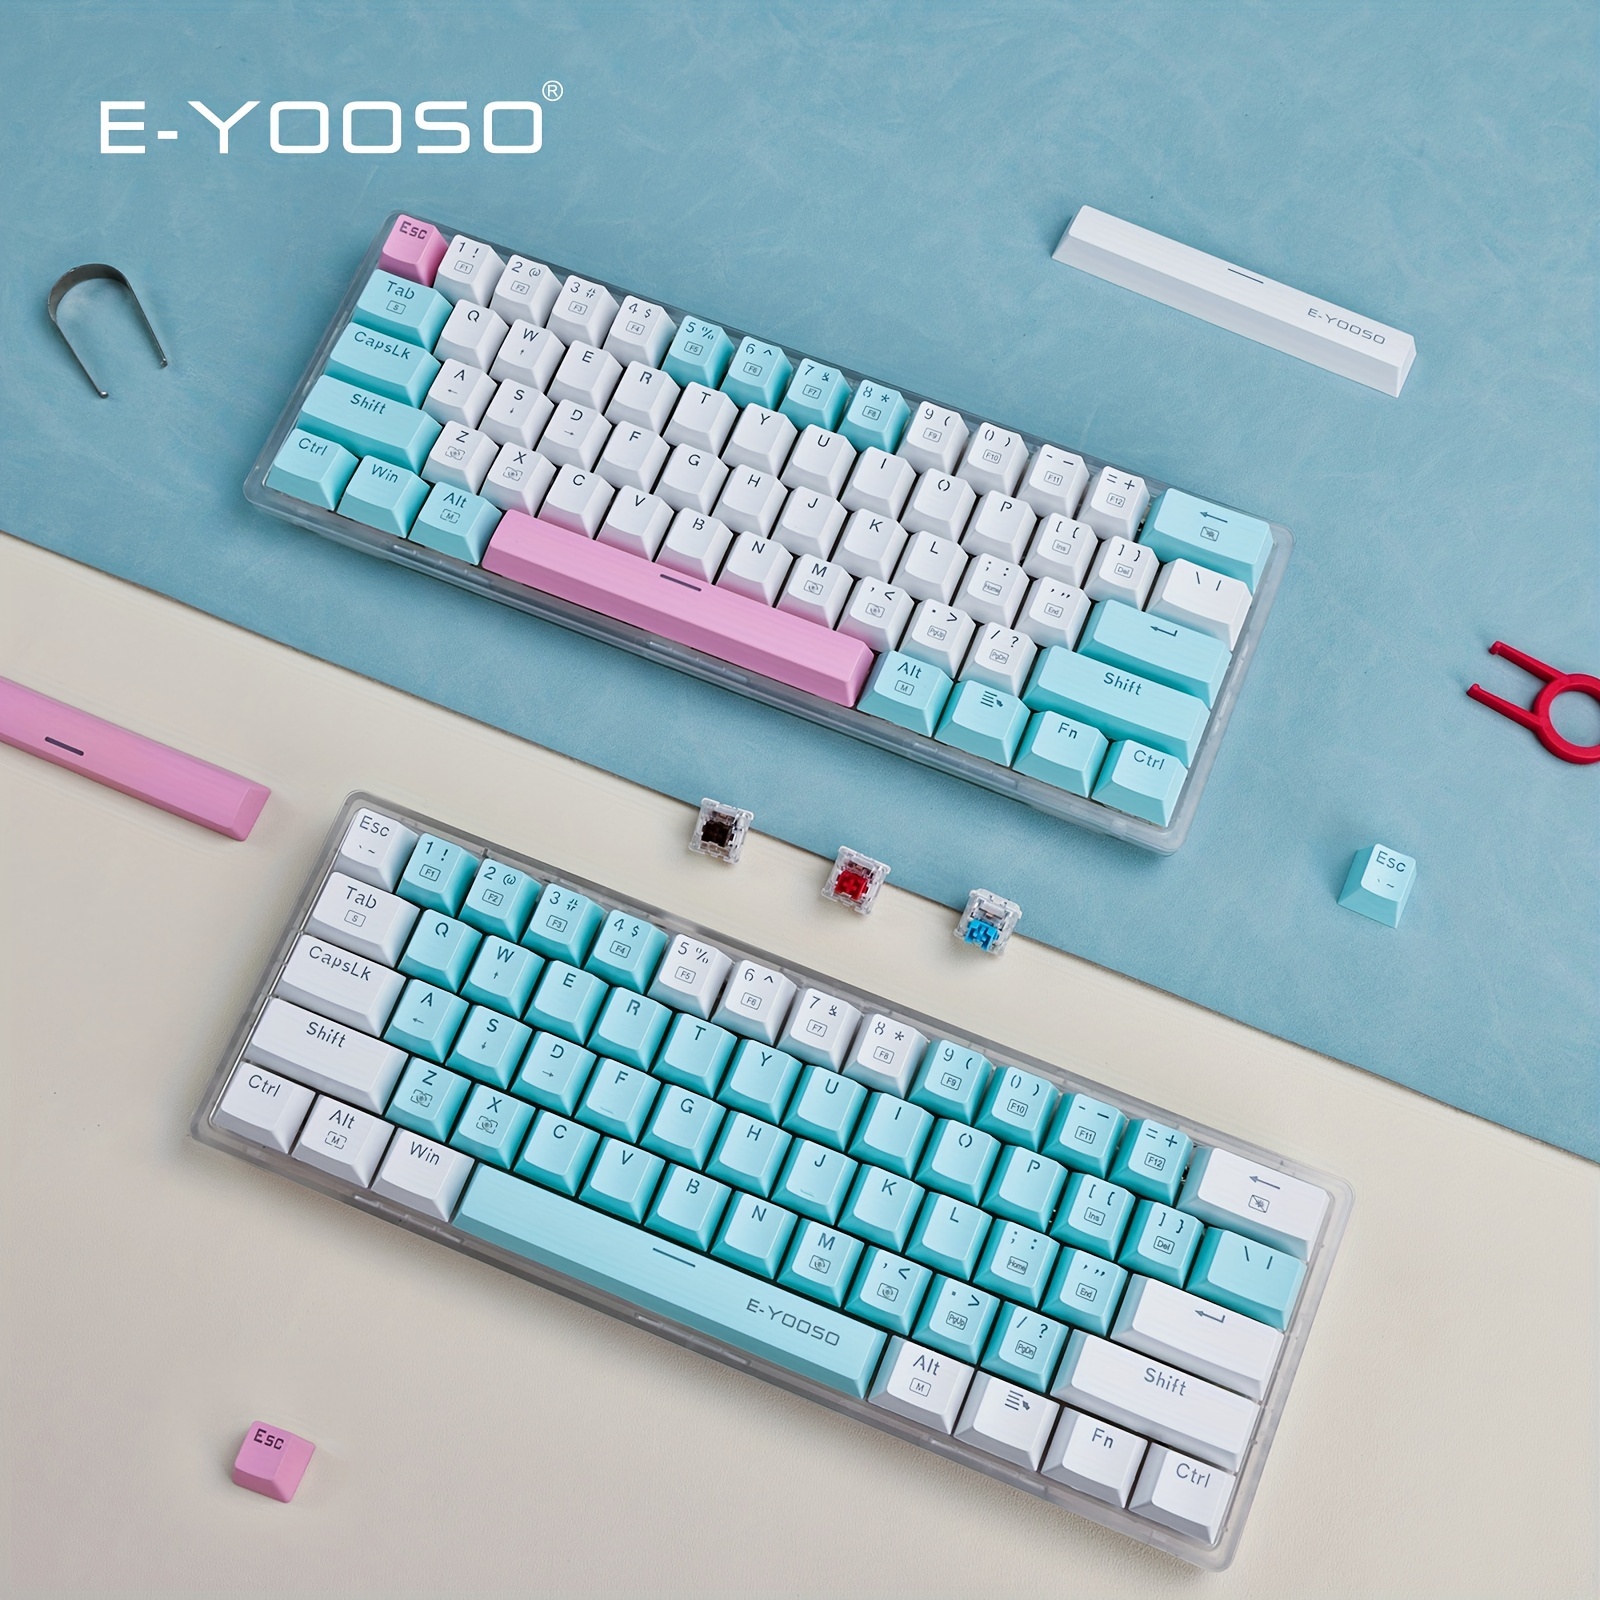 

E-yooso Z-11t 60% Mechanical Keyboard, Mechanical Gaming Keyboard Wired With Led Backlit, Ultra-compact 60 Percent Computer Keyboard For Windows, Os (white Blue)